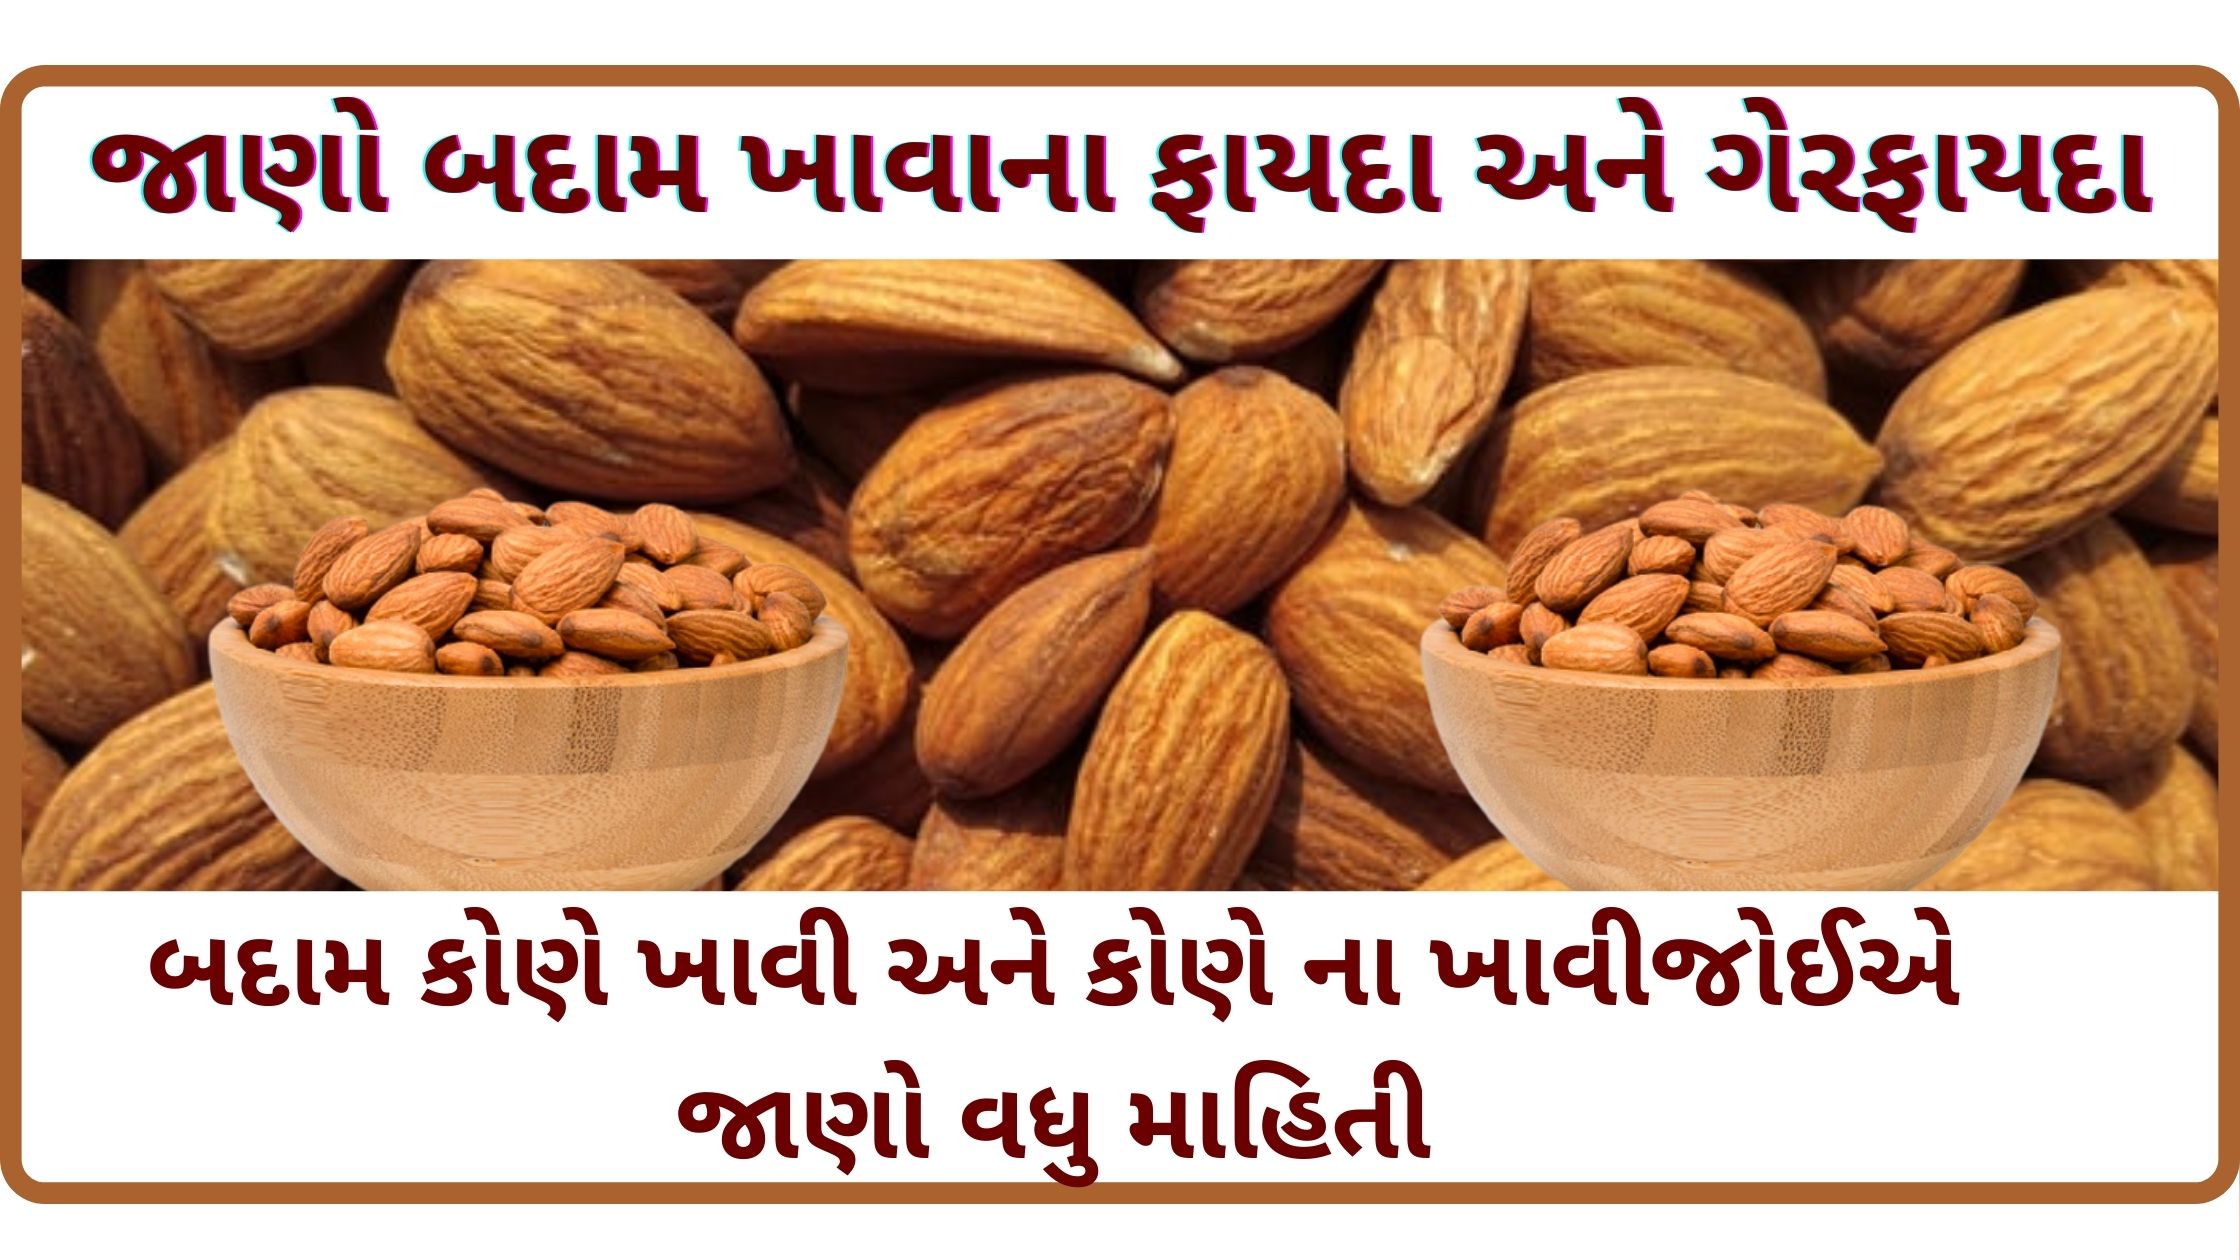 Advantages and disadvantages of eating nuts